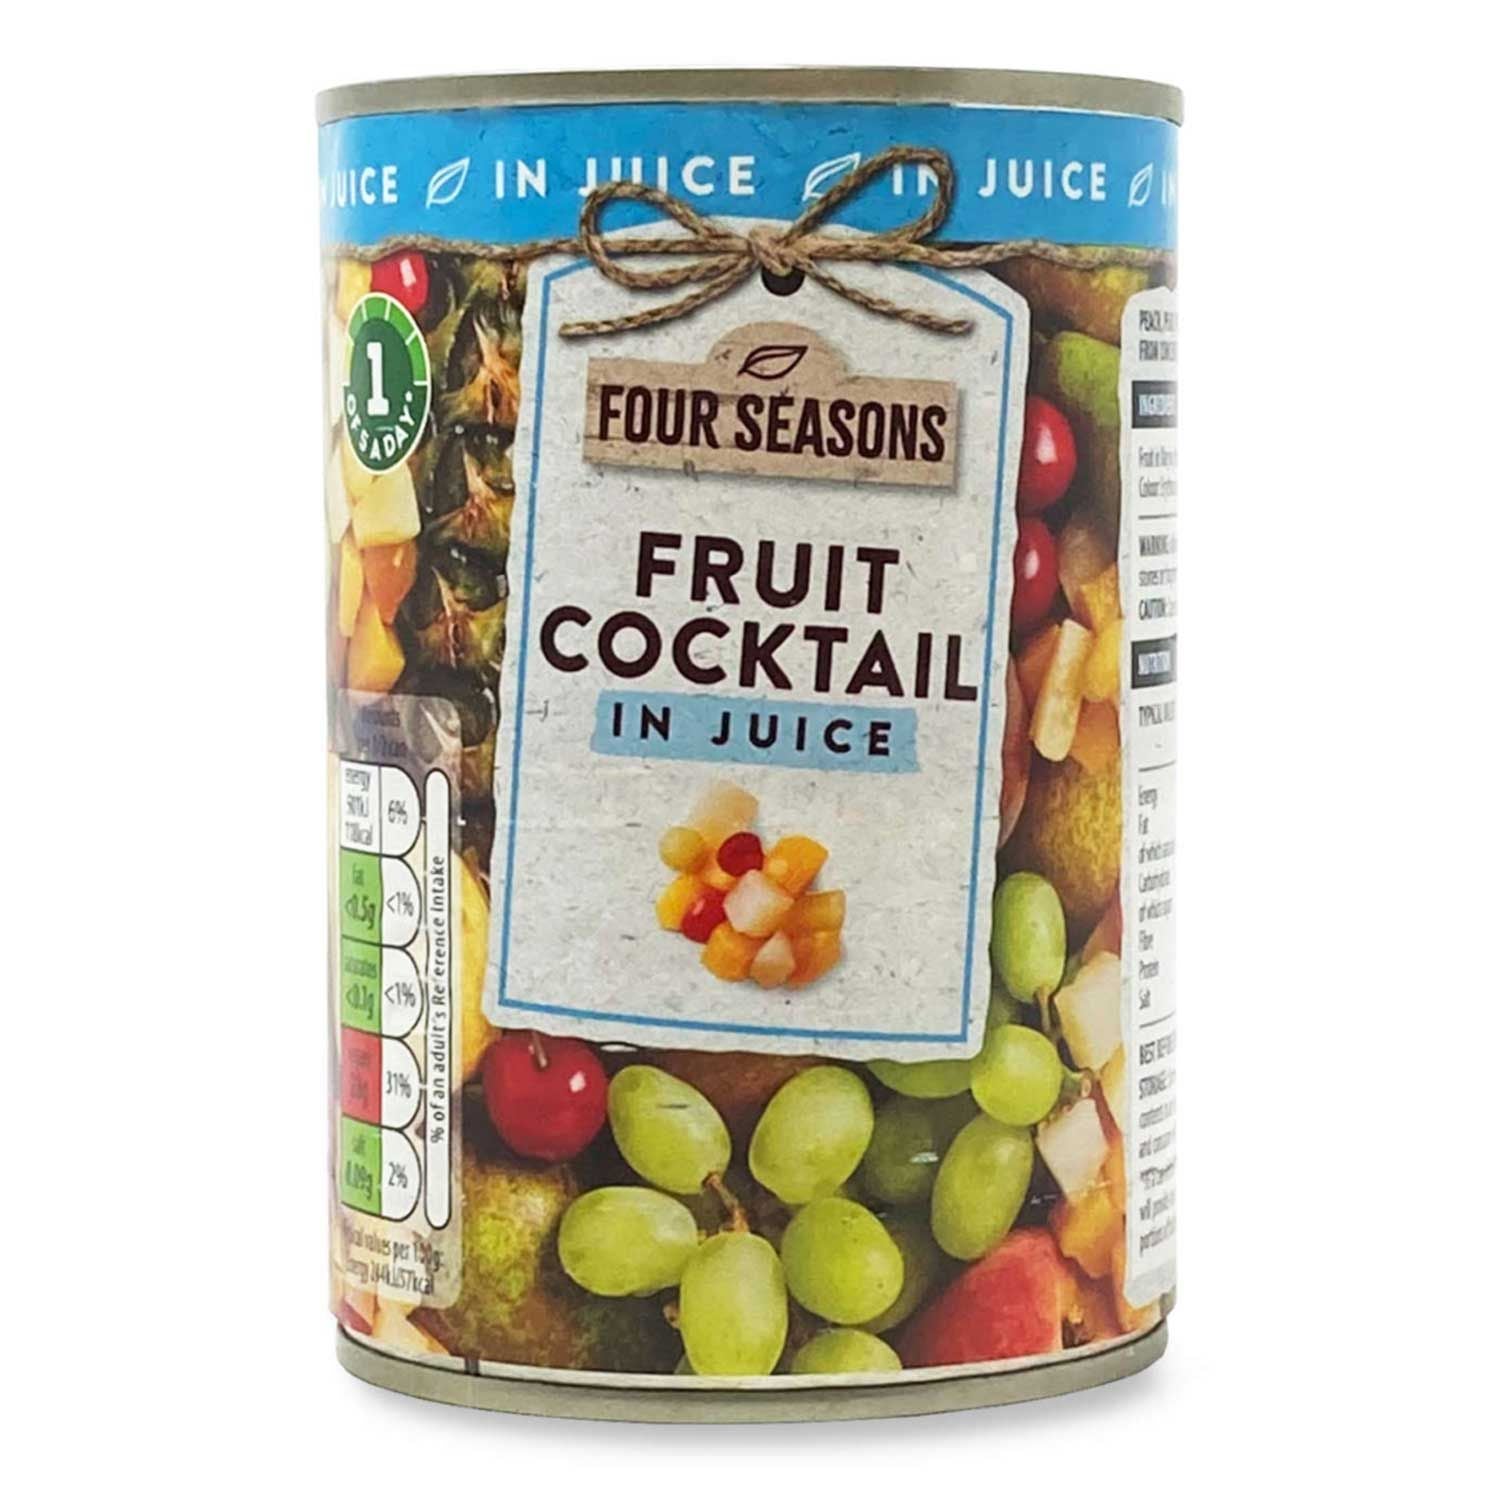 Four Seasons Fruit Cocktail In Juice 411g (250g Drained)